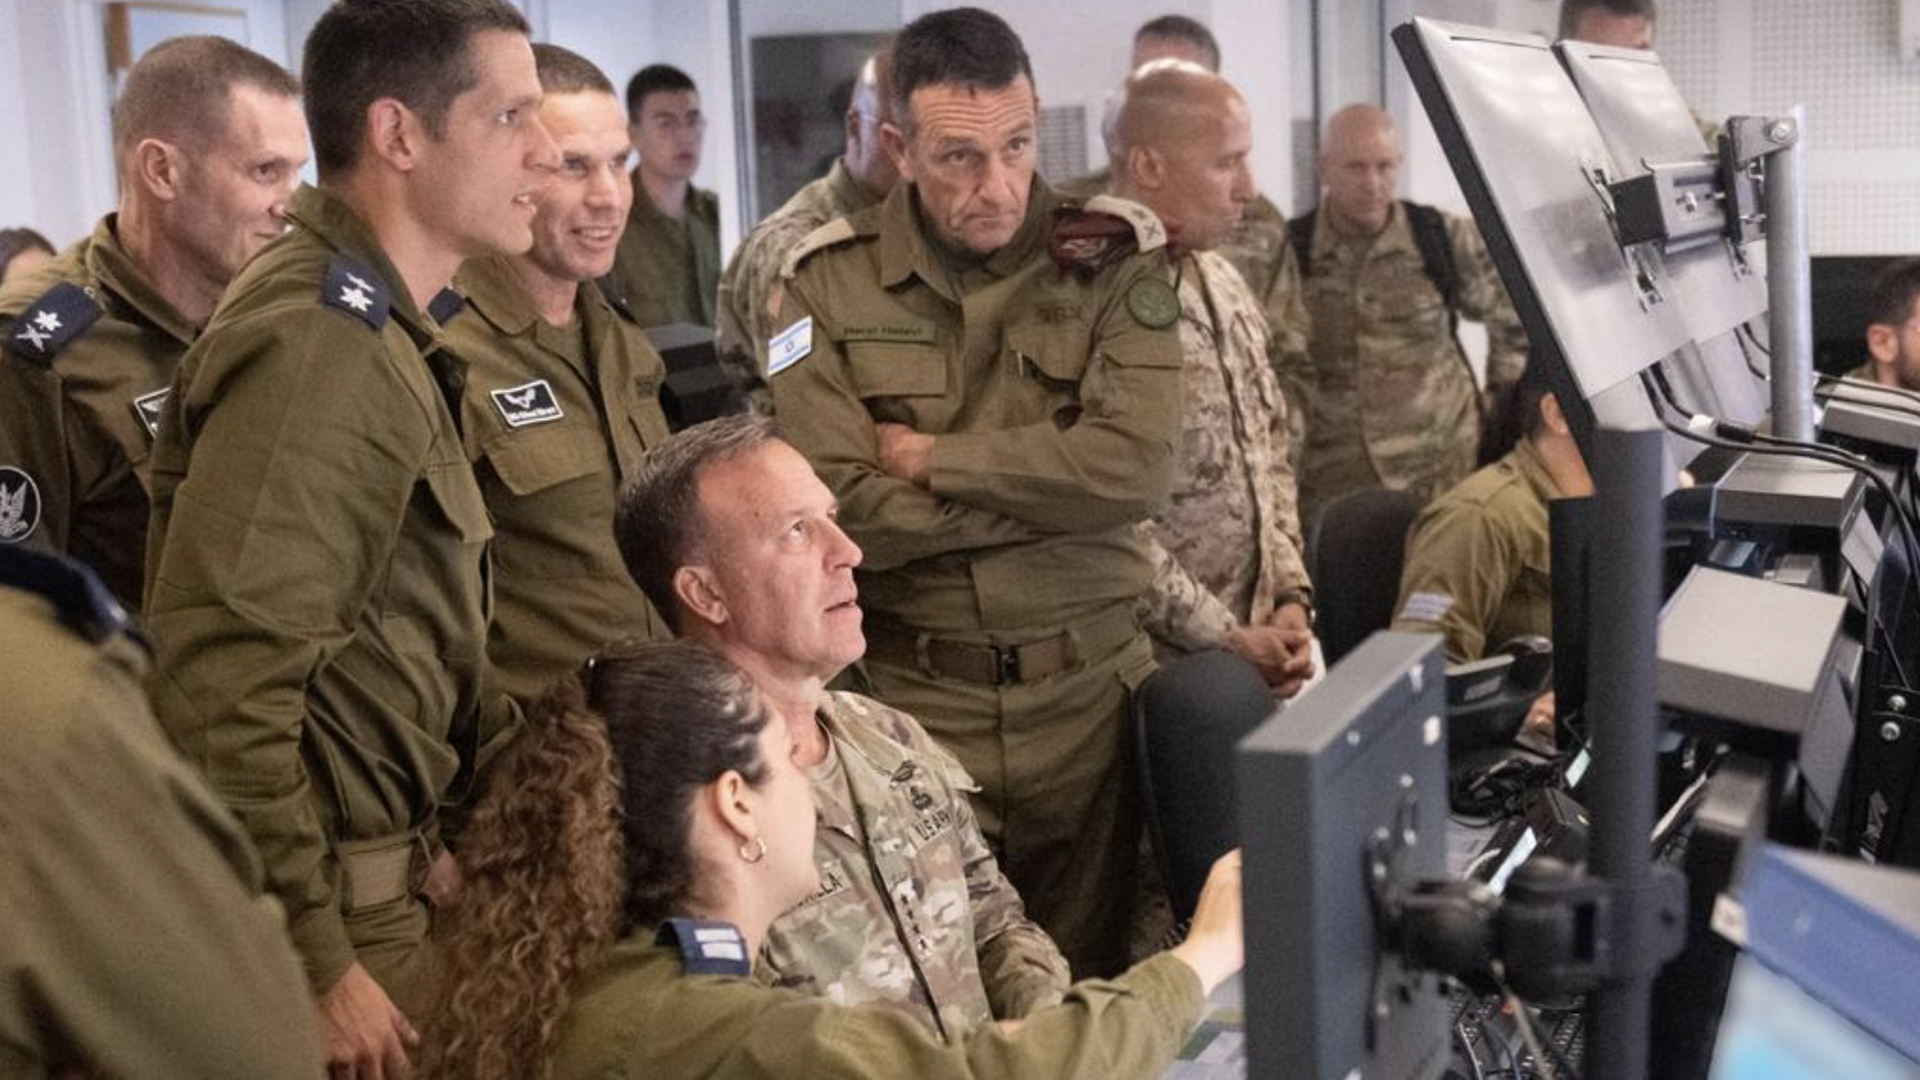 U.S. Gen. Michael Kurilla surrounded by Israeli soldiers in front of a computer.